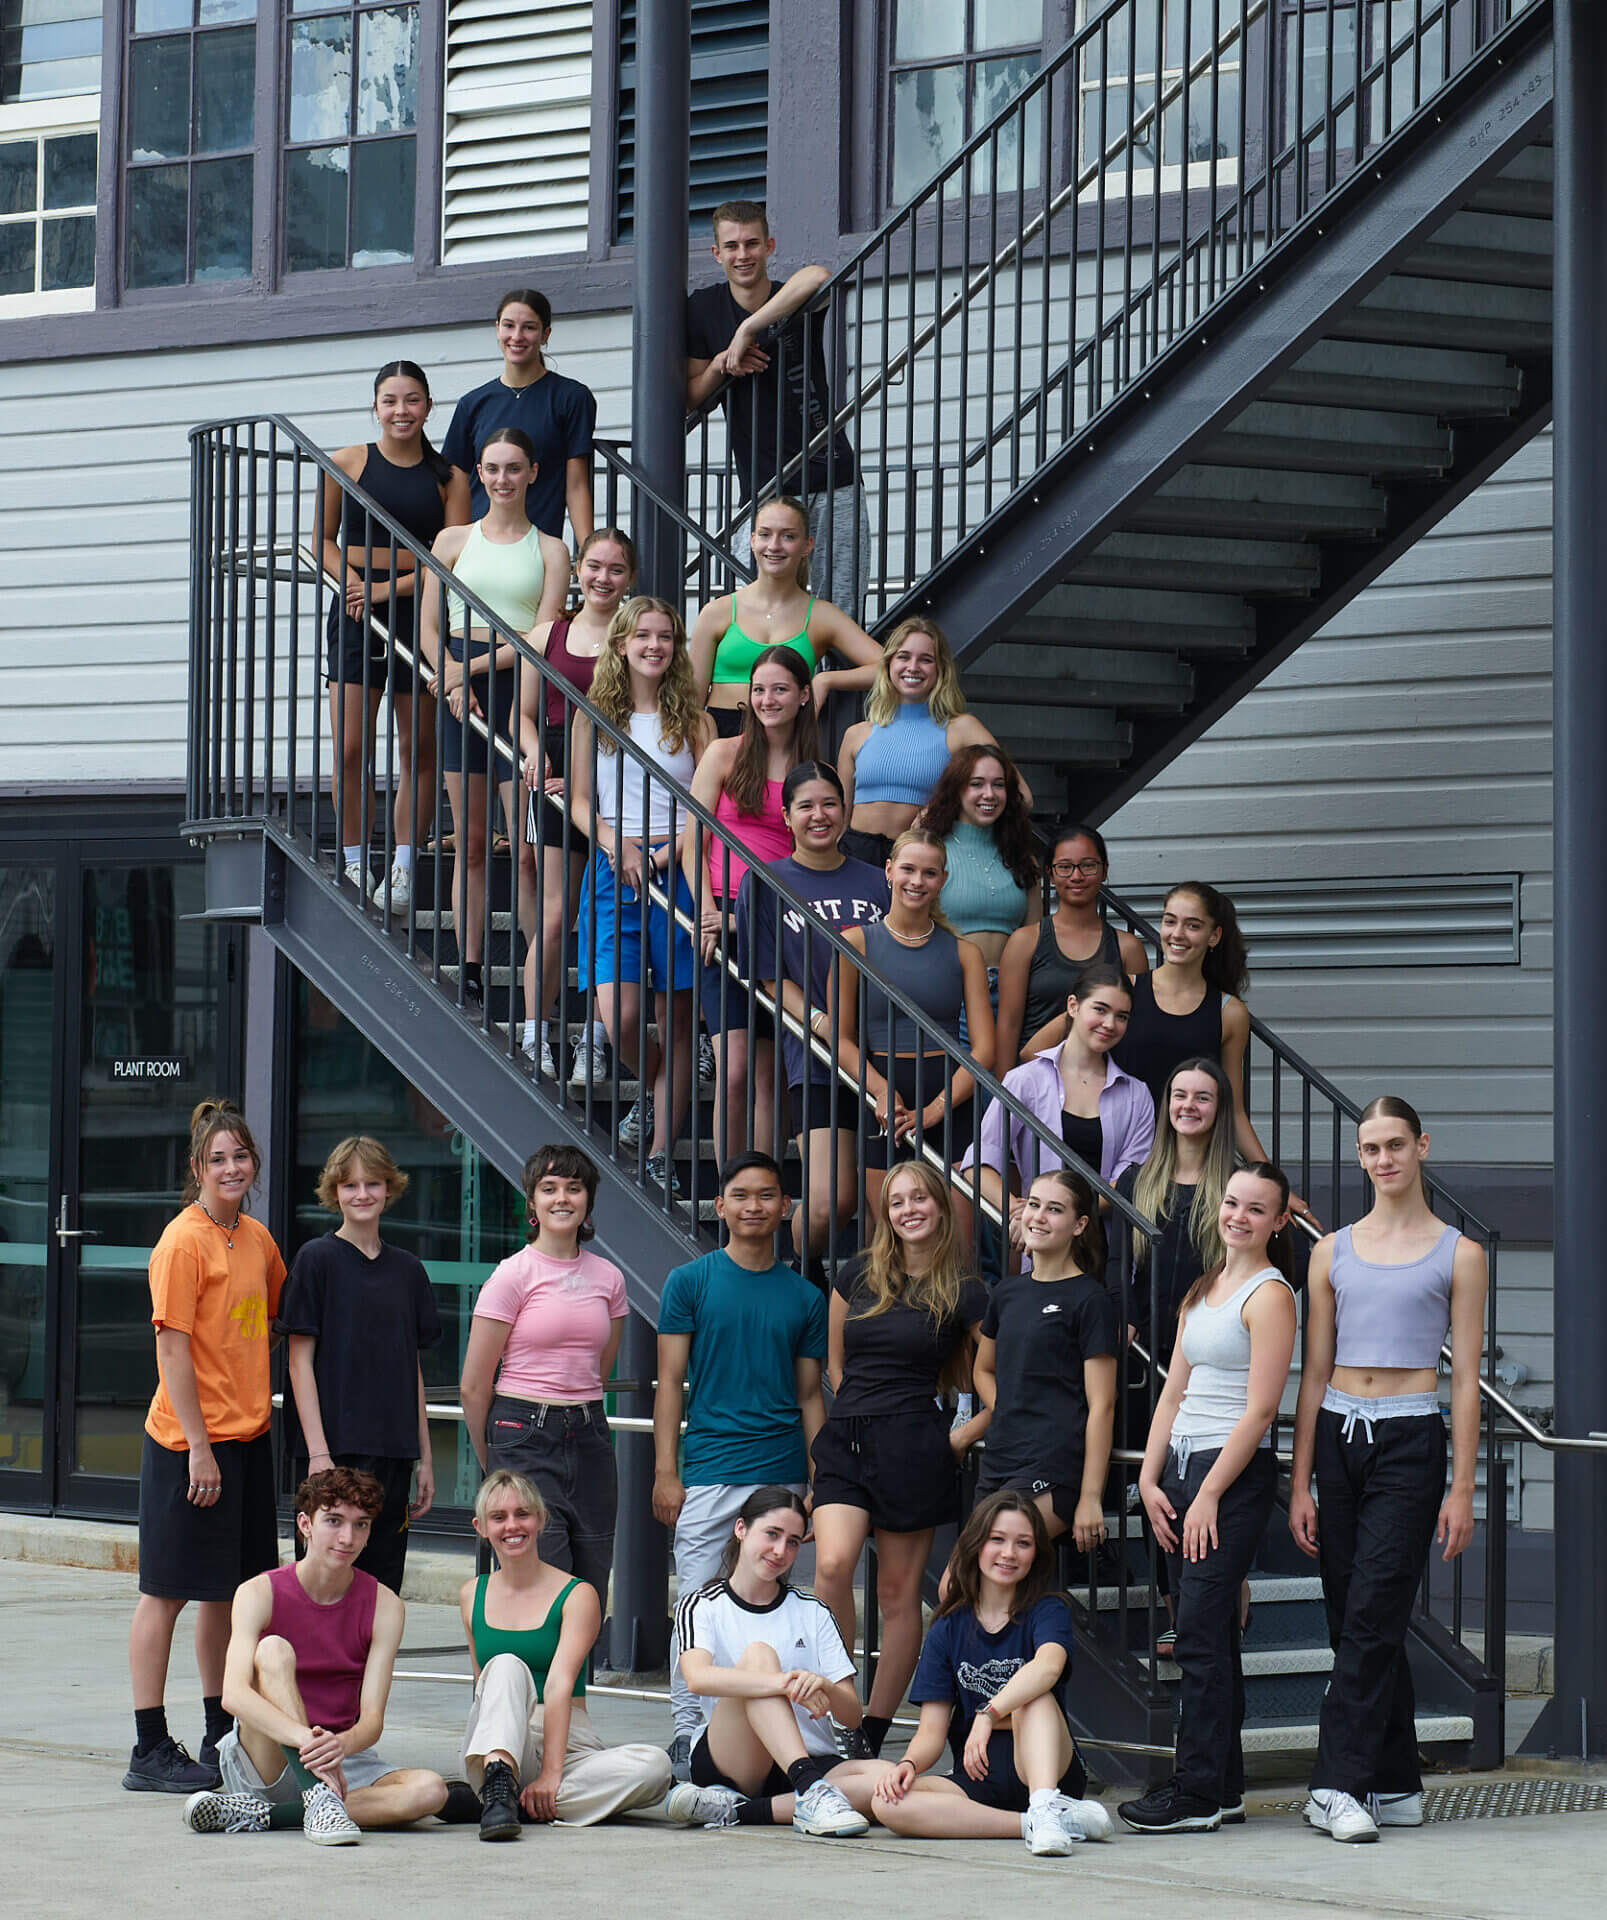 The Pre-Professional Year consort of 60 dancers gathers on the spiral staircase outside the Harbourside home of Sydney Dance Company. They are all smiling into the camera.